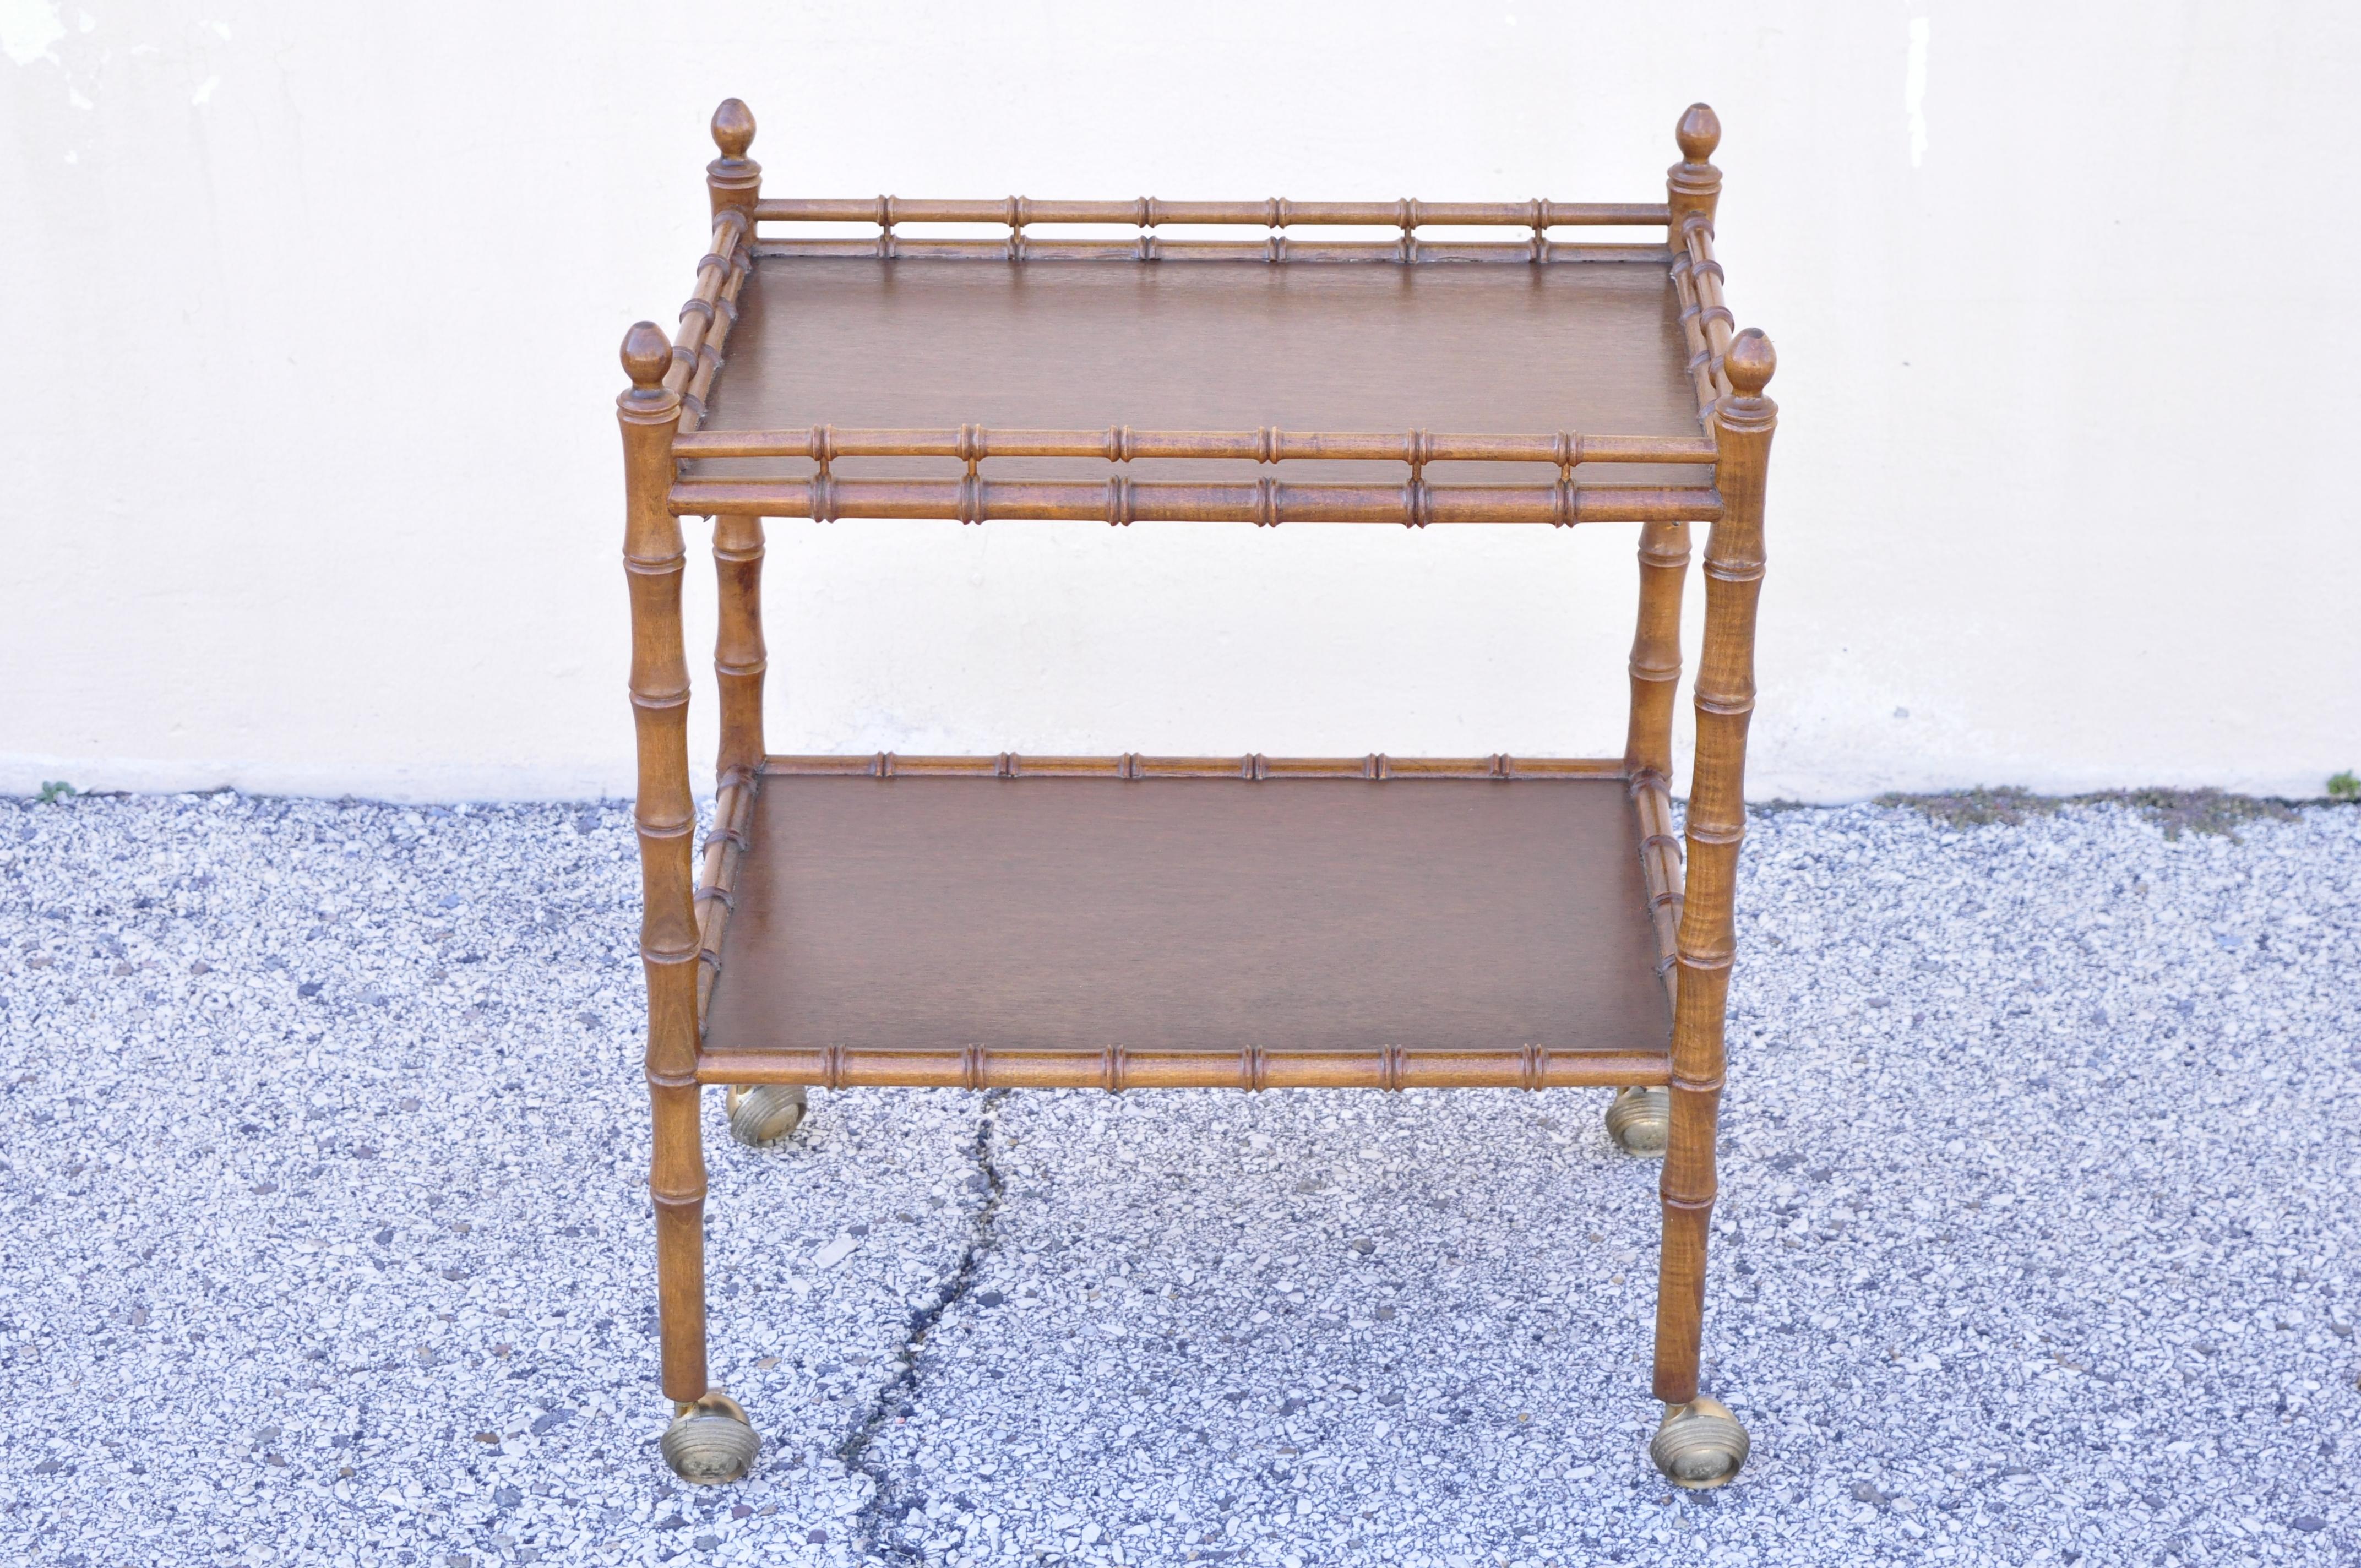 Vintage faux bamboo Chinese Chippendale Hollywood Regency wood bar cart server table. Item features rolling casters, 2 tiers shelves, carved faux bamboo frame, very nice vintage item, great style and form. Circa mid 20th century. Measurements: 29.5